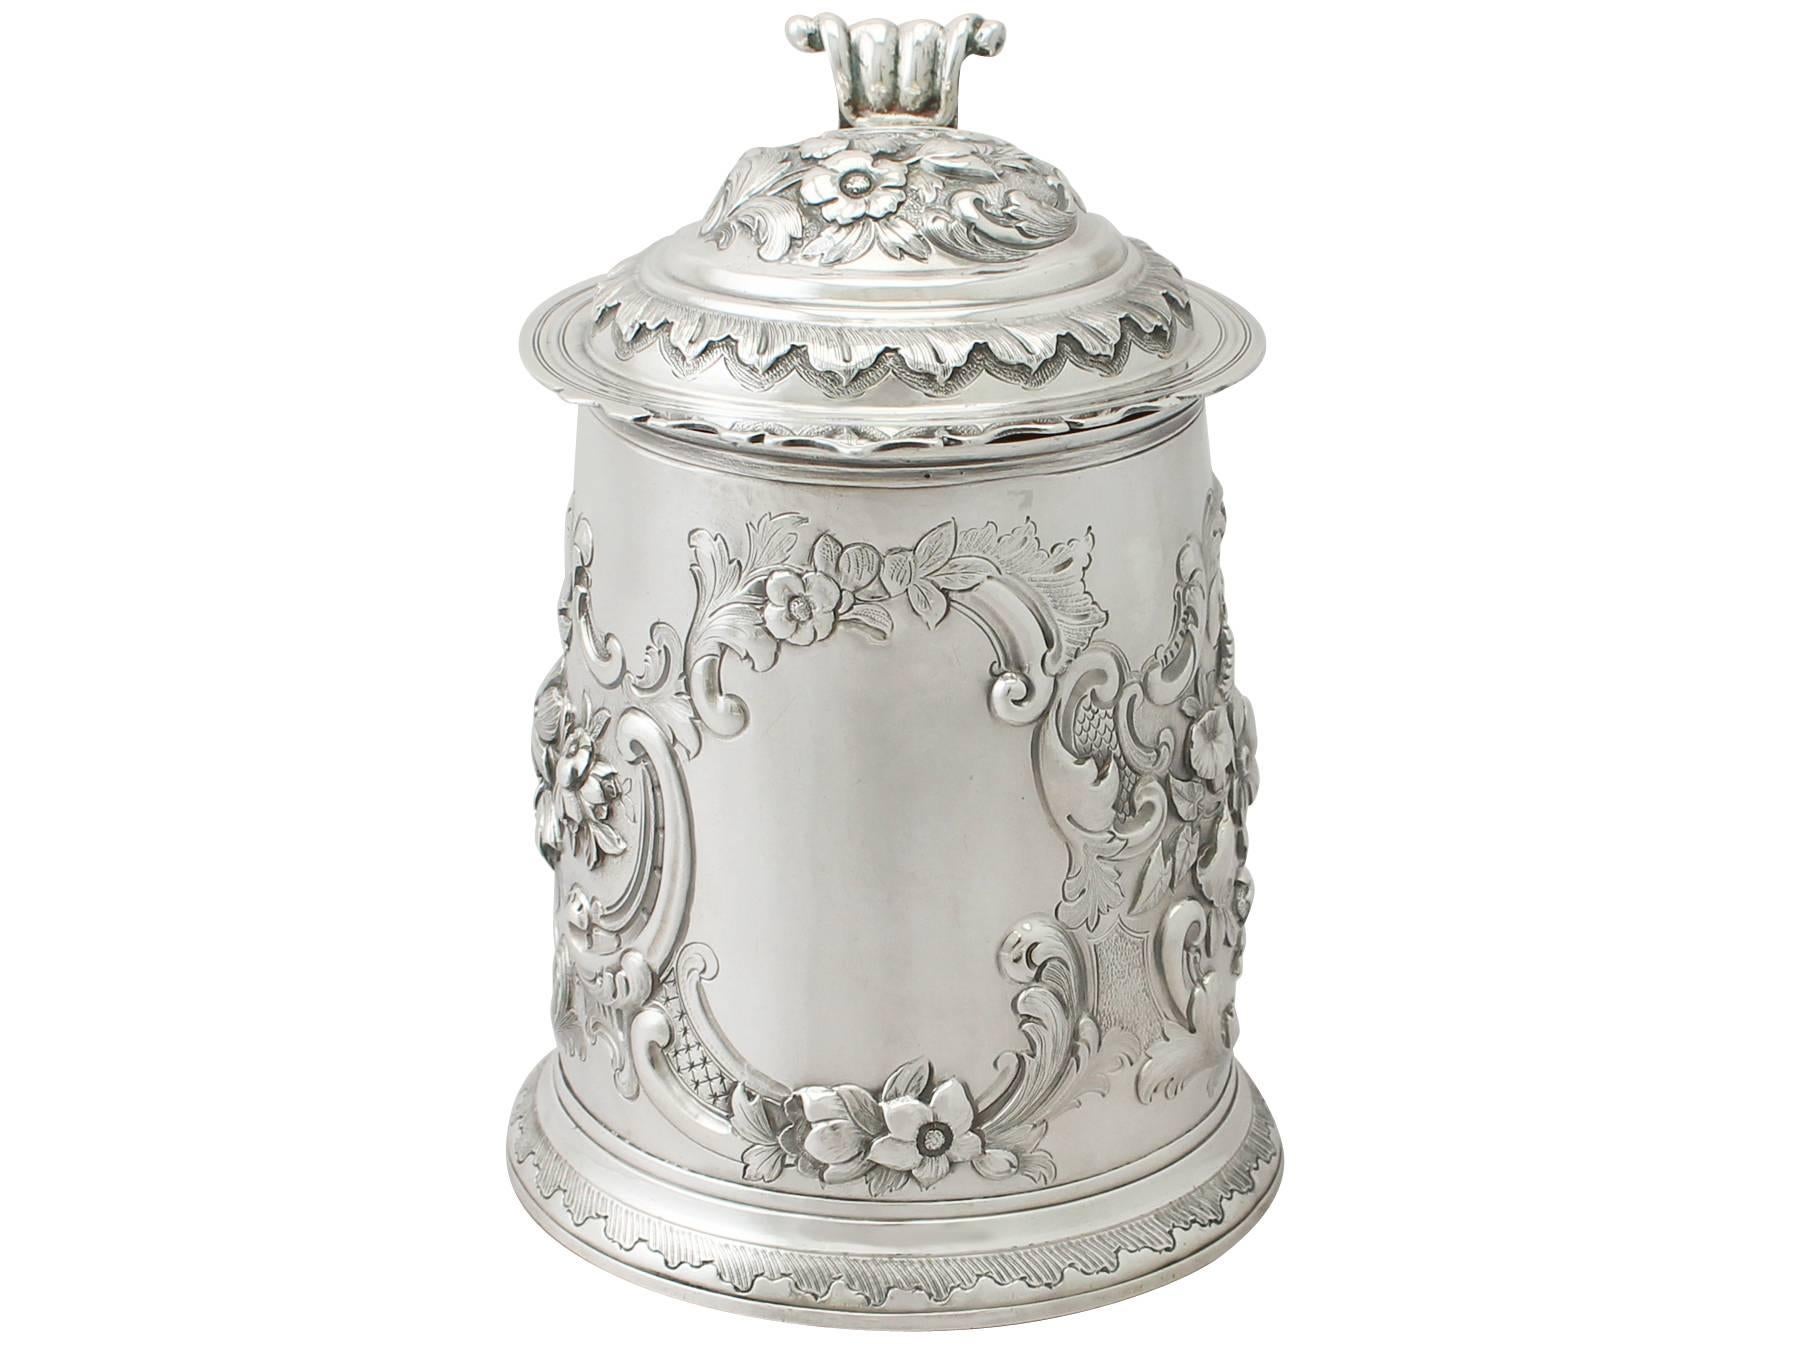 An exceptional, fine and impressive antique Queen Anne English Britannia standard silver tankard; an addition to our silver tankard collection.

This fine Queen Anne Britannia standard* silver tankard has a tapering cylindrical form onto a domed